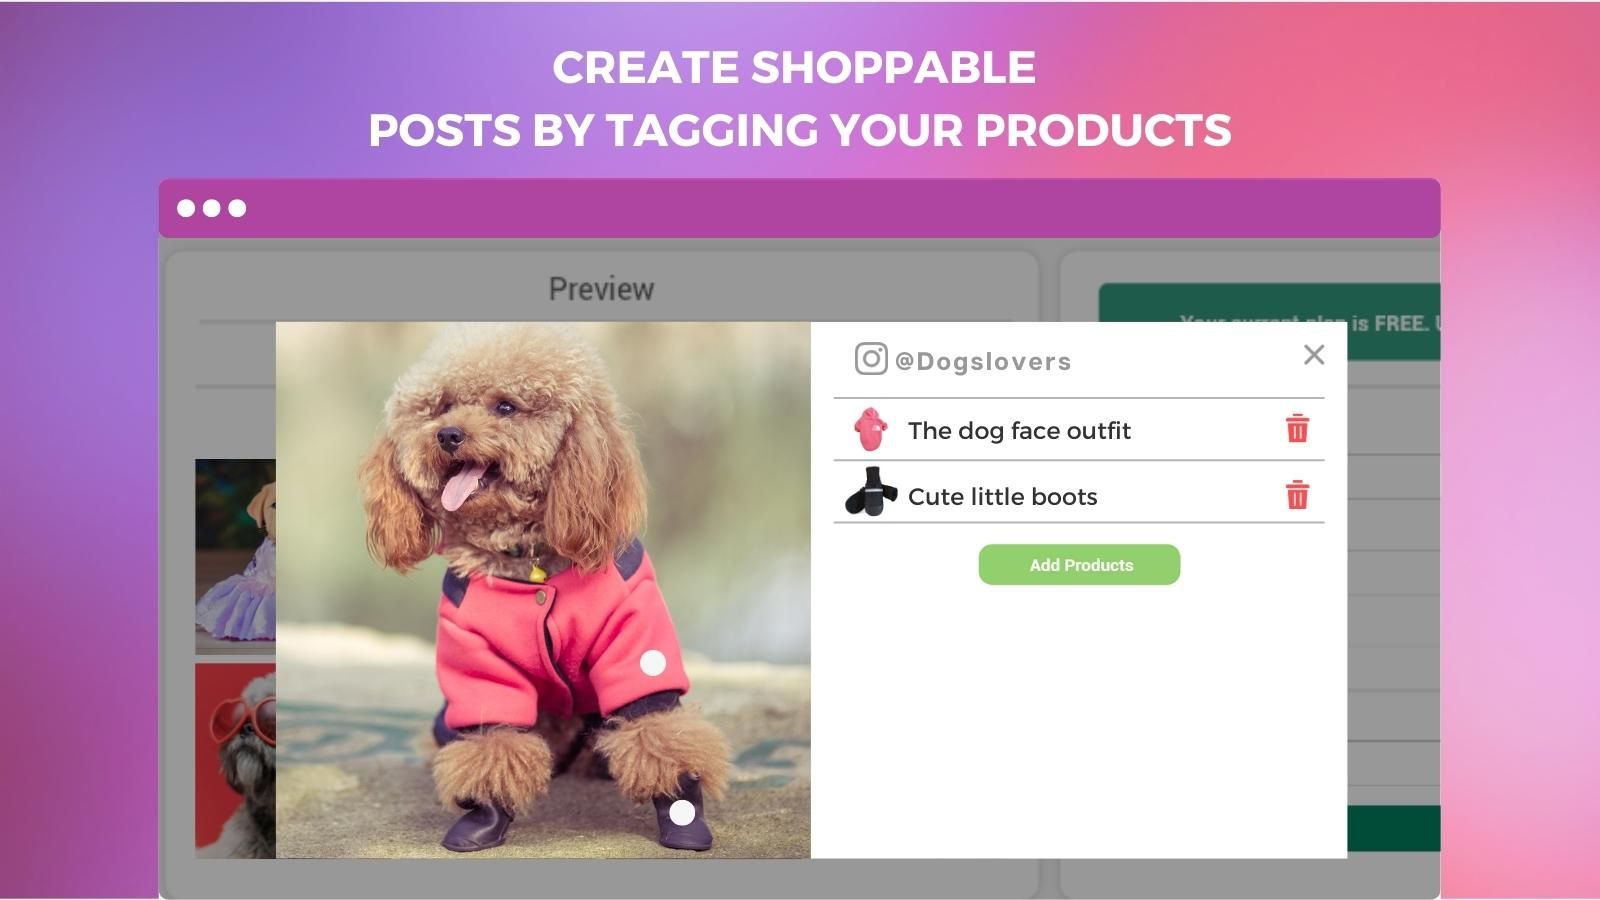 Create shoppable posts by tagging your products